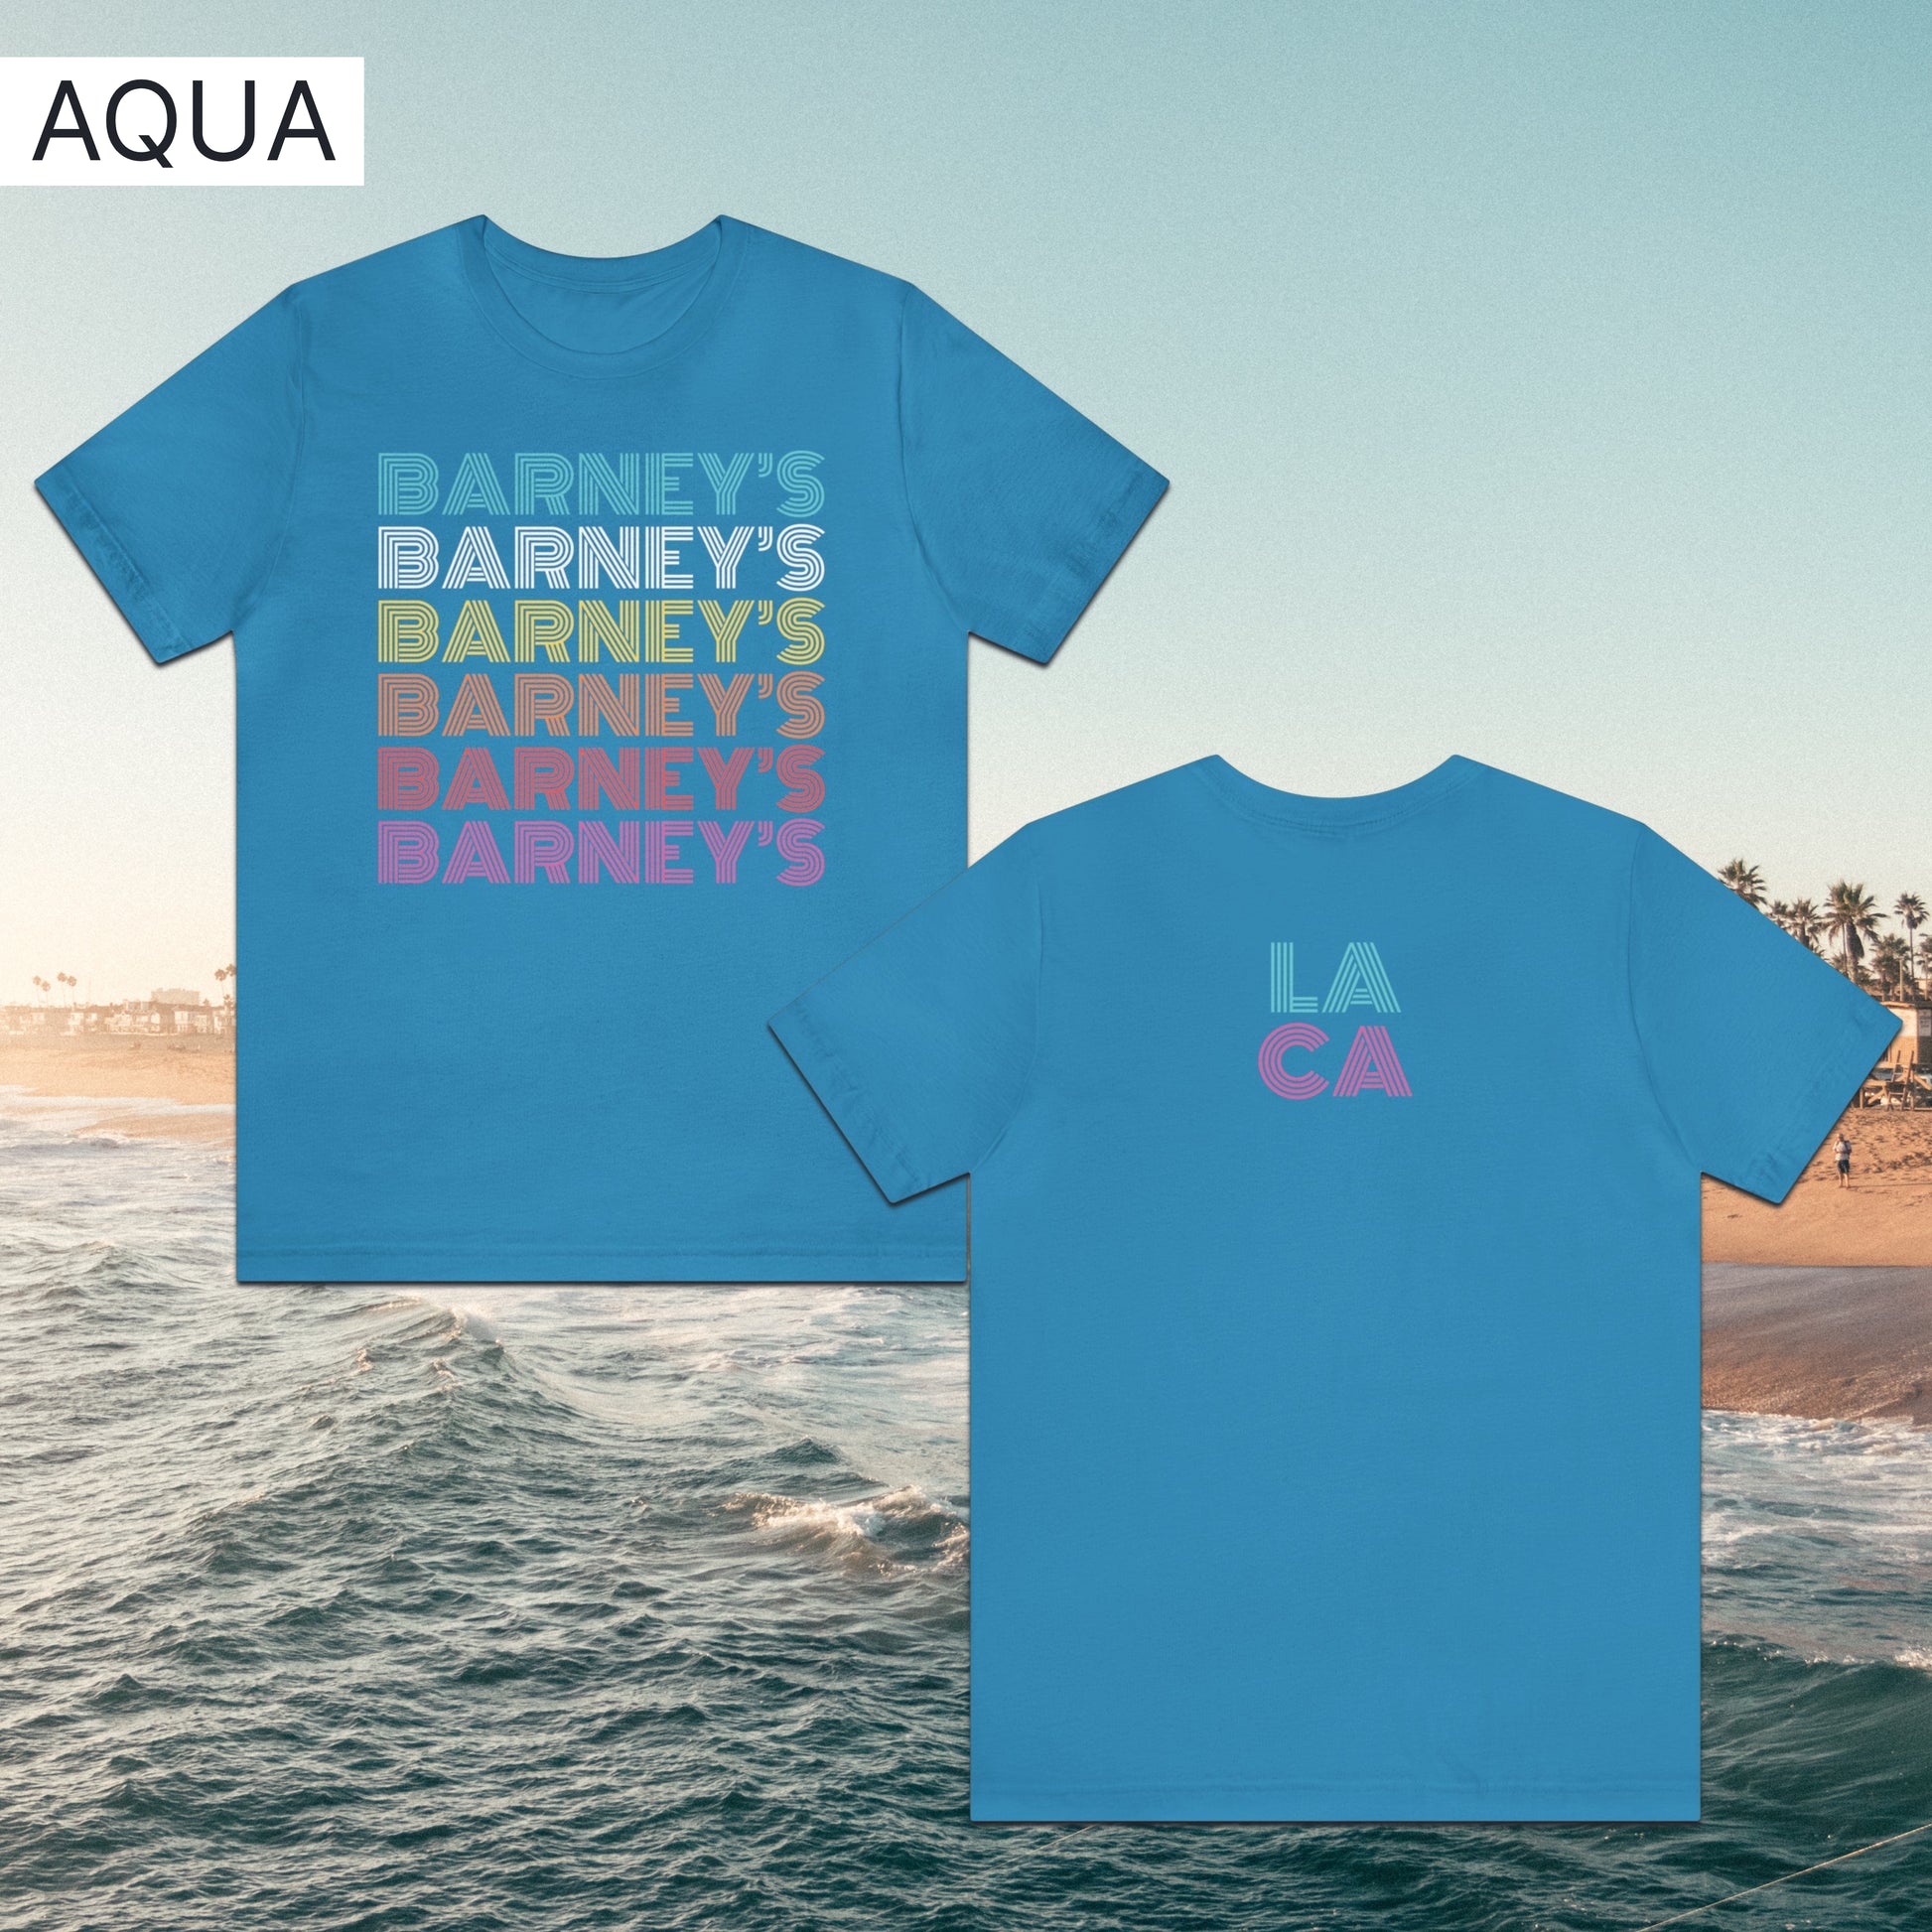 Barney's x6 Retro Hollywood | BARNEY'S BEANERY - Women's Retro Graphic Tee | Aqua Bella+Canvas 3001 T-Shirt - Front And Back Flat Lay View